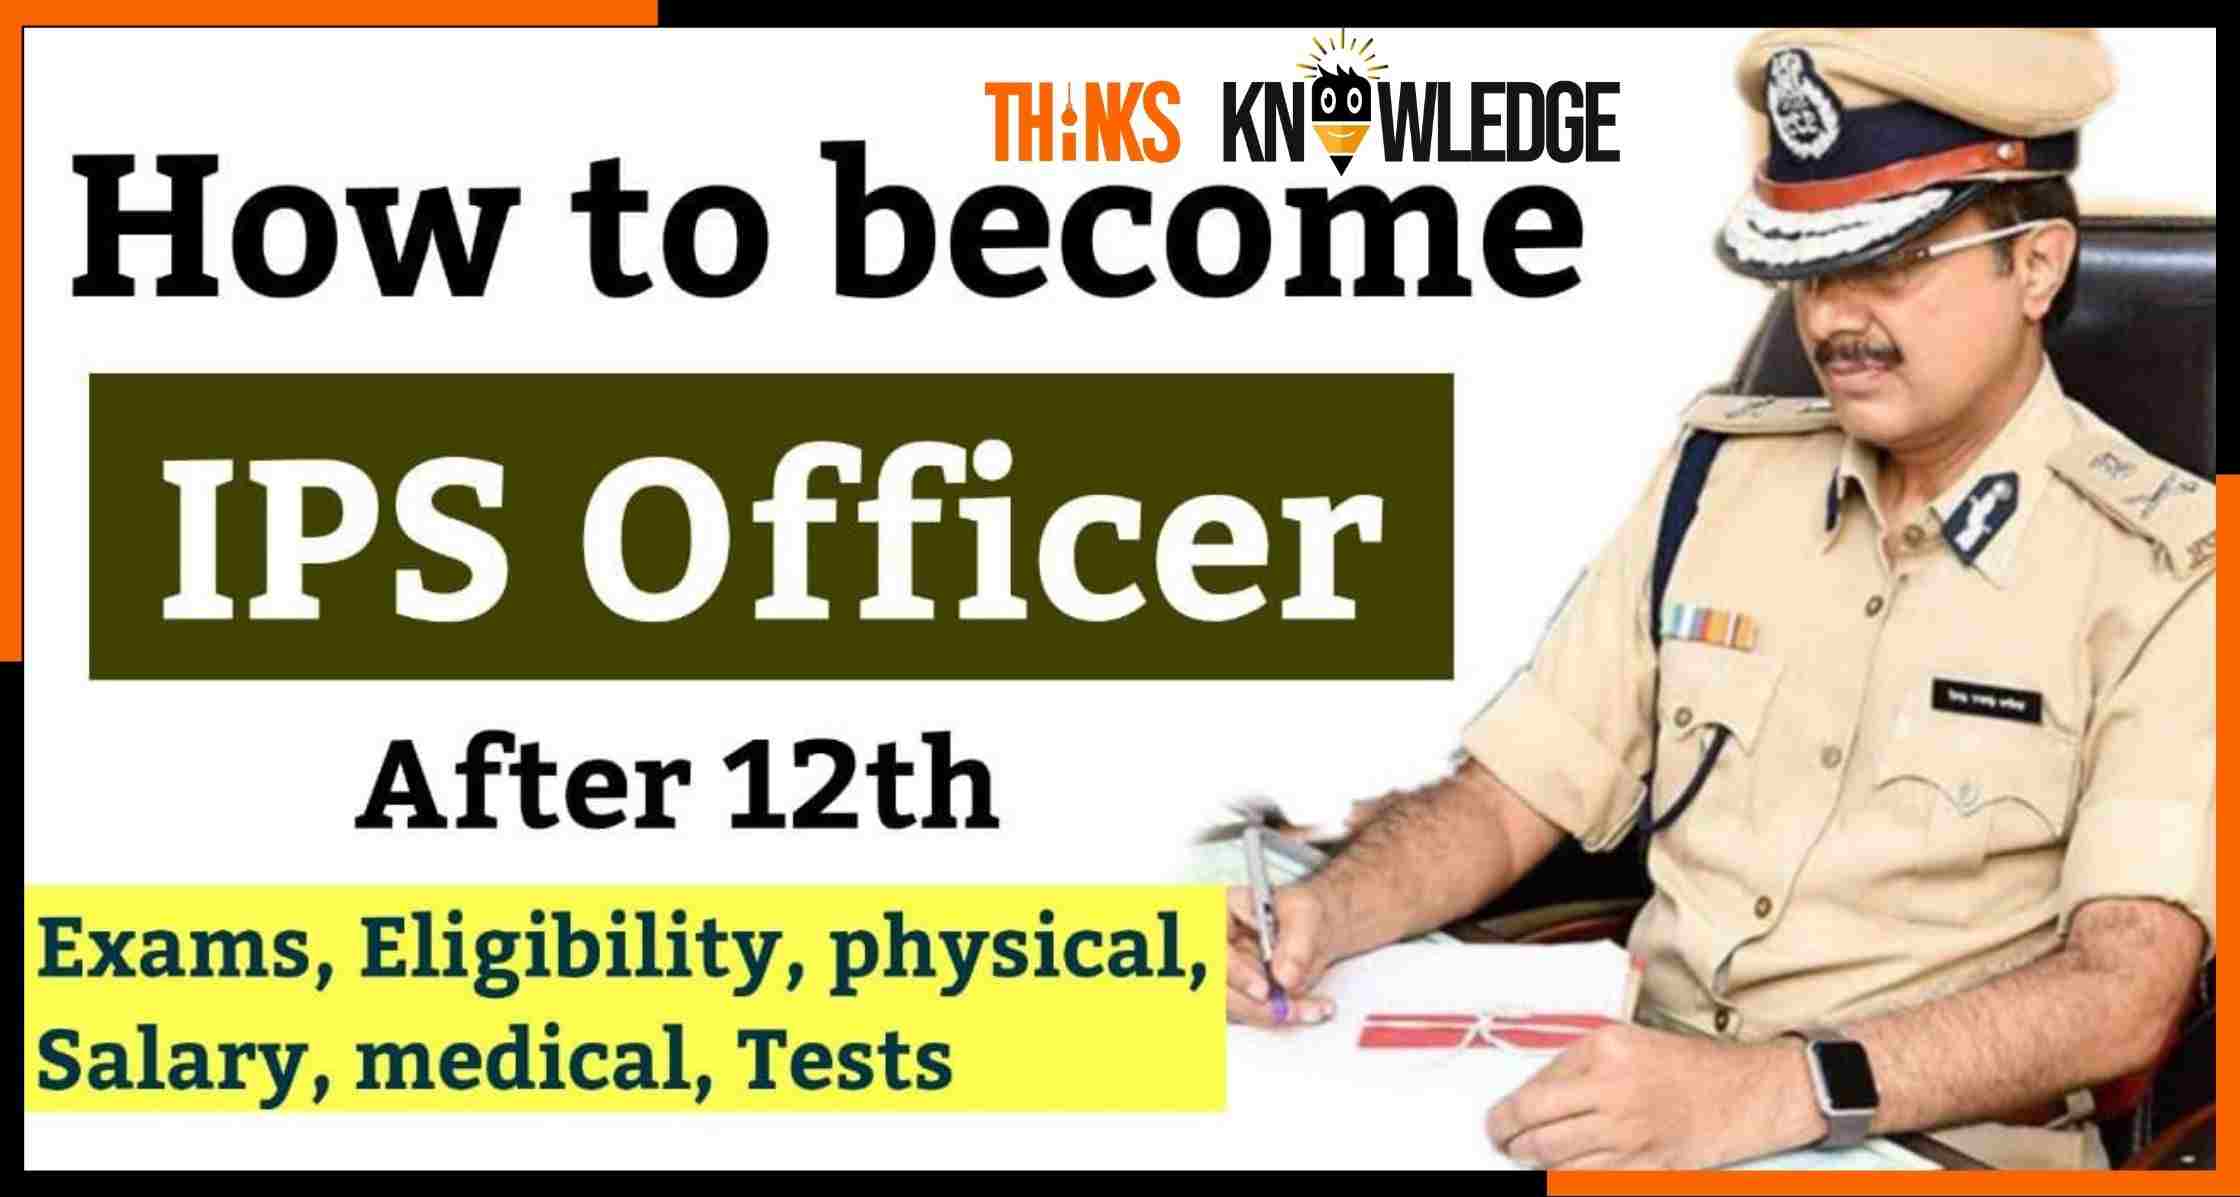 How to Become an IPS Officer After 12th